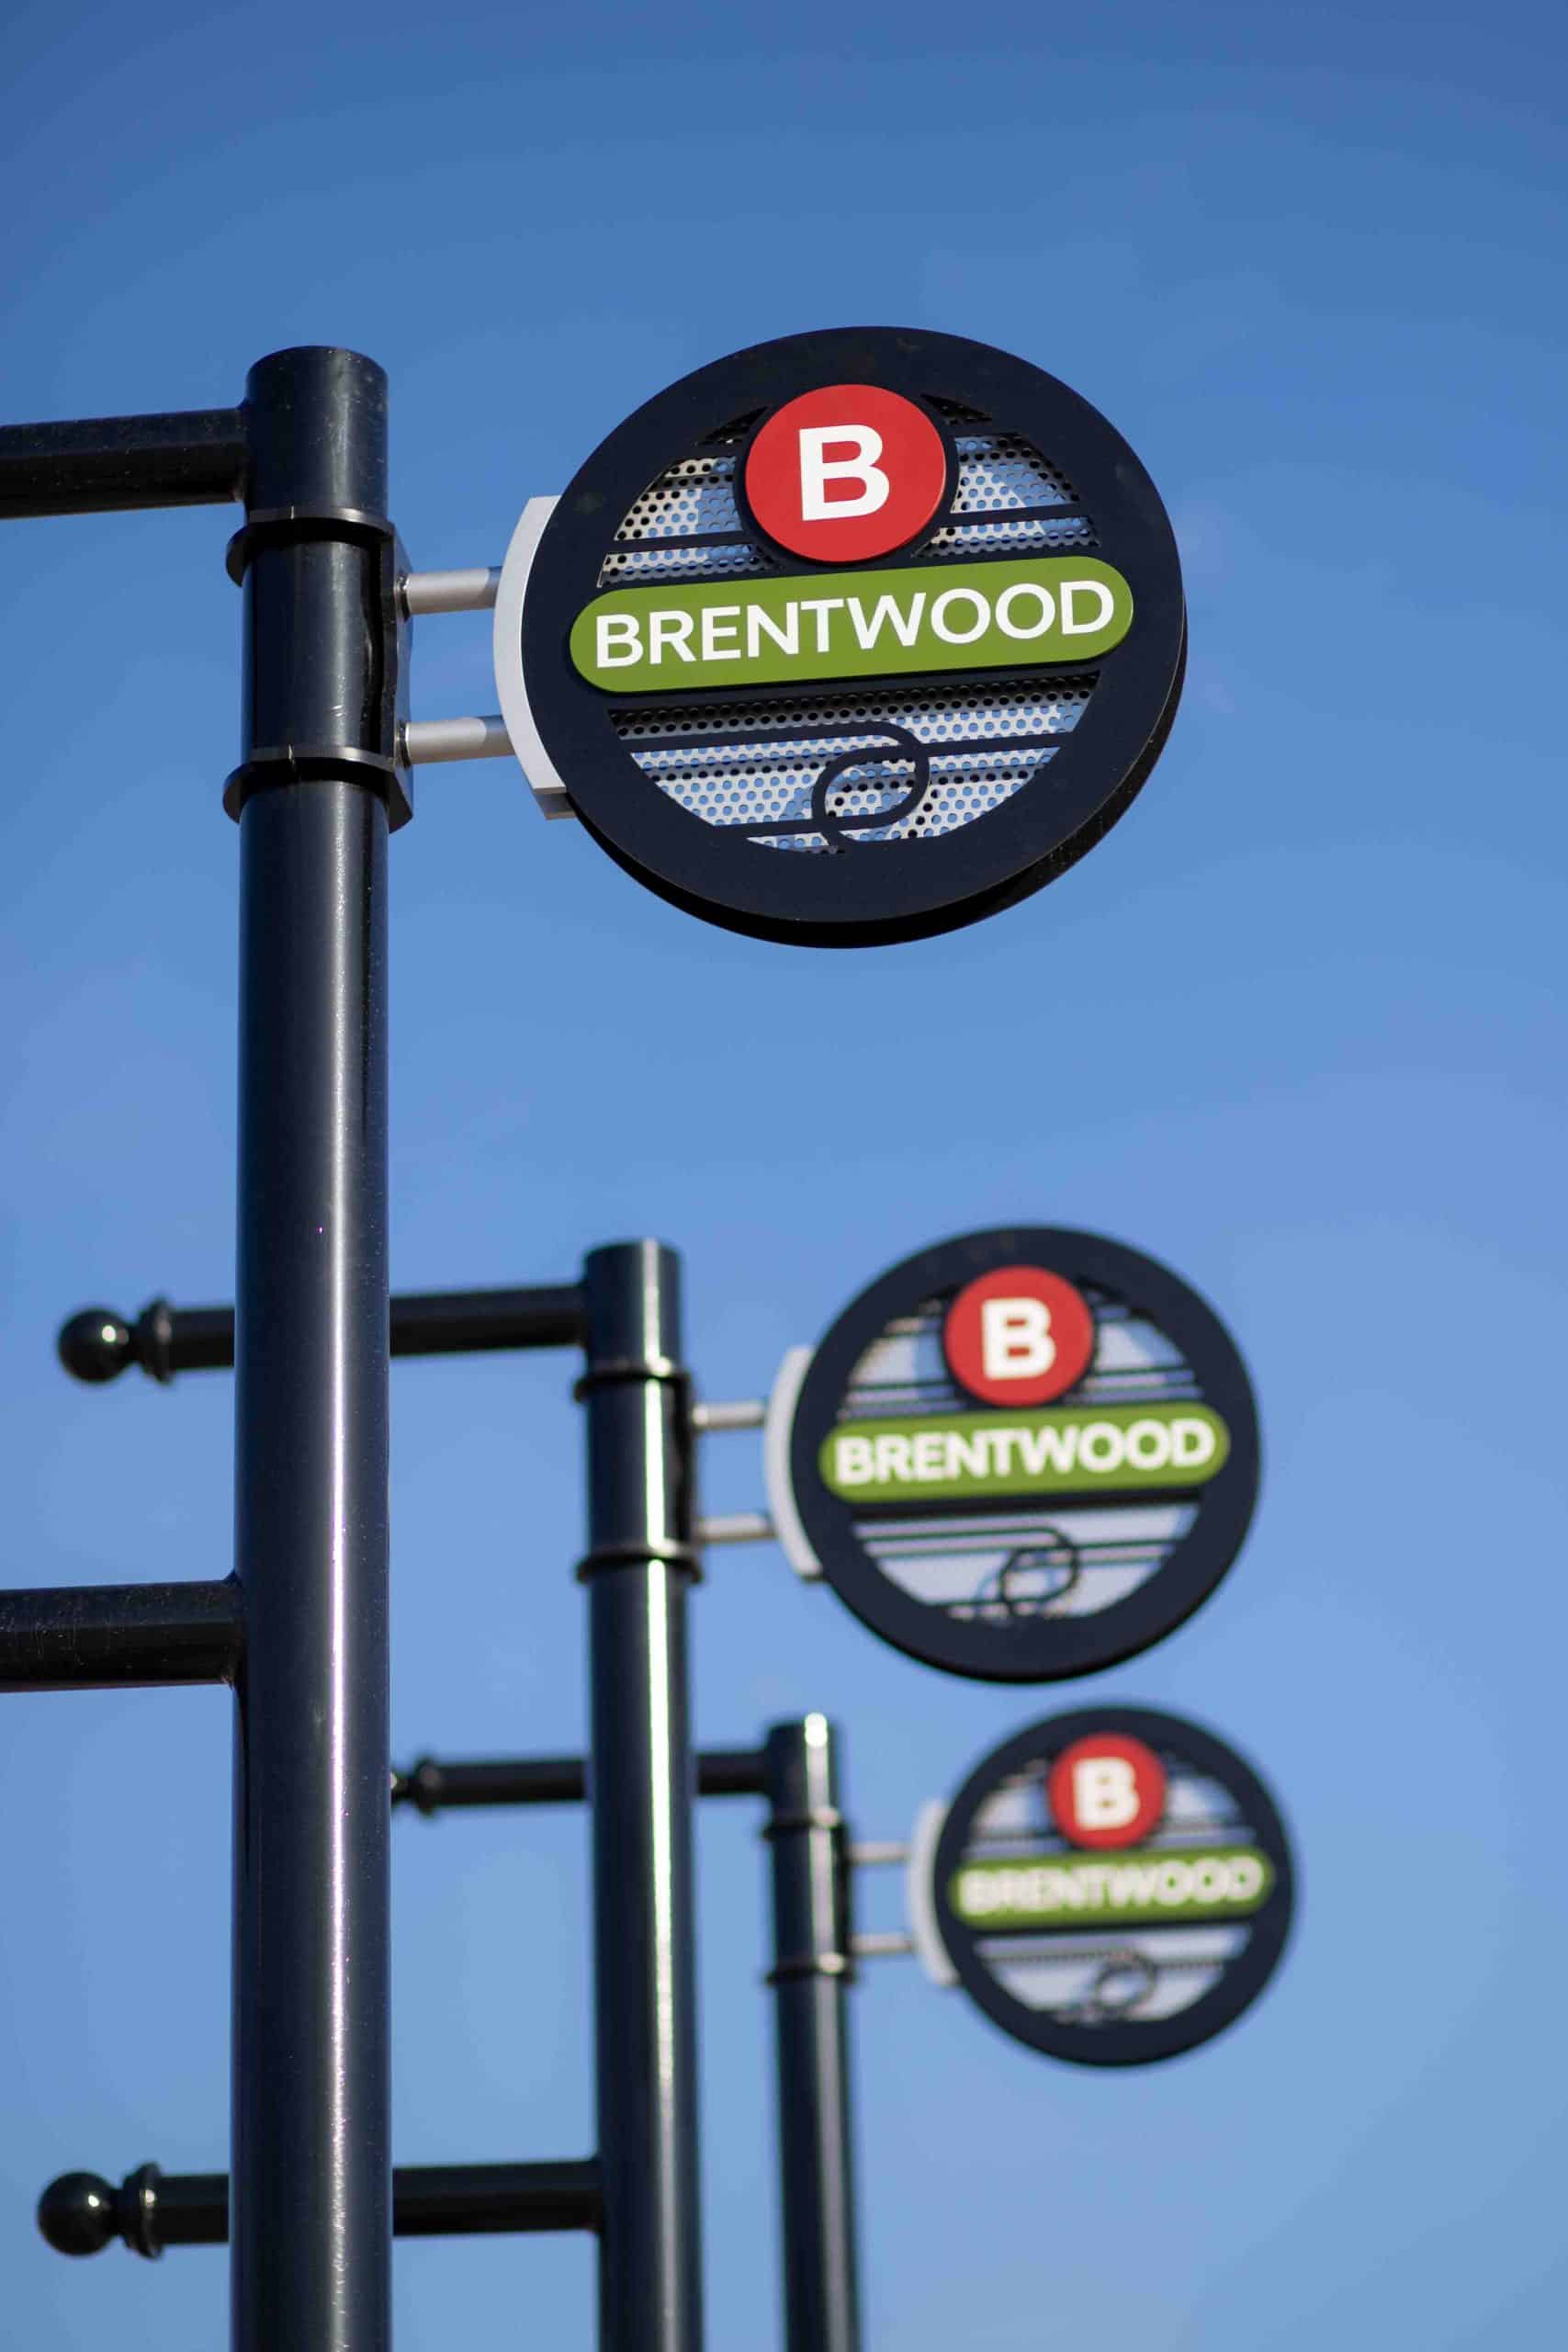 Custom poles to hold flags for Brentwood city with custom blade sign attachments with dimensional features